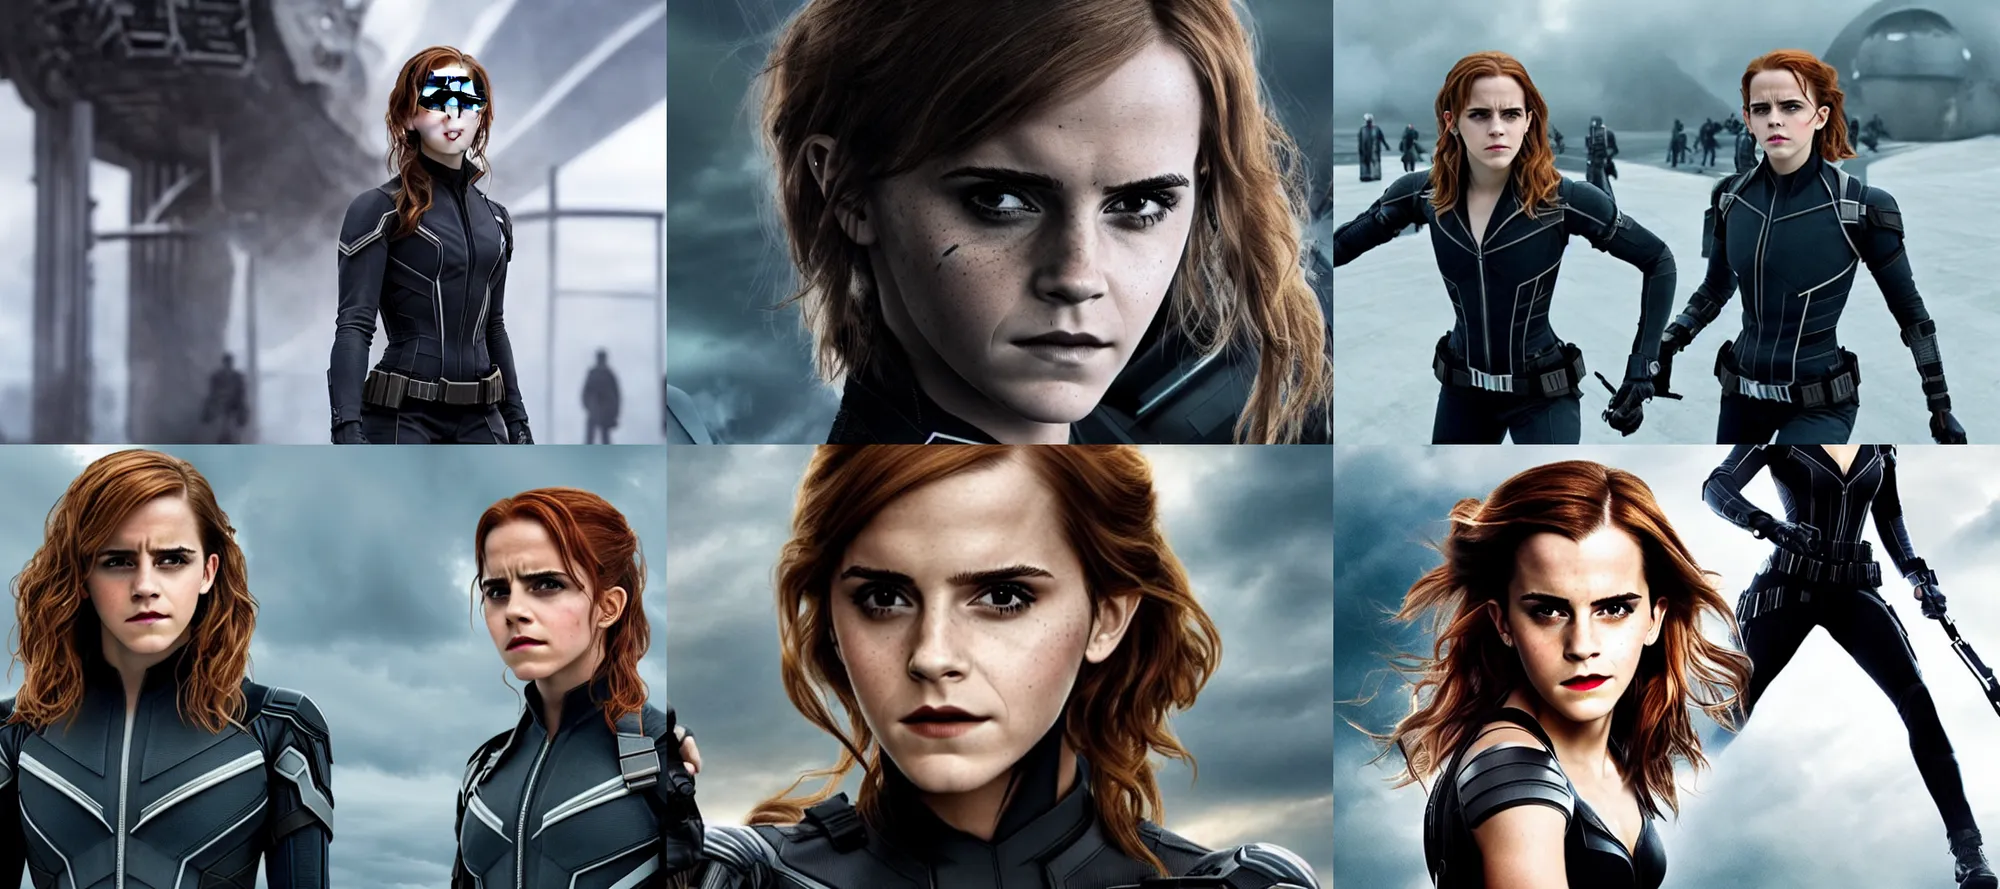 Prompt: promotional image of Emma Watson as the Black Widow in the new movie directed by Taika Waititi, detailed face, movie still, promotional image, imax 70 mm footage